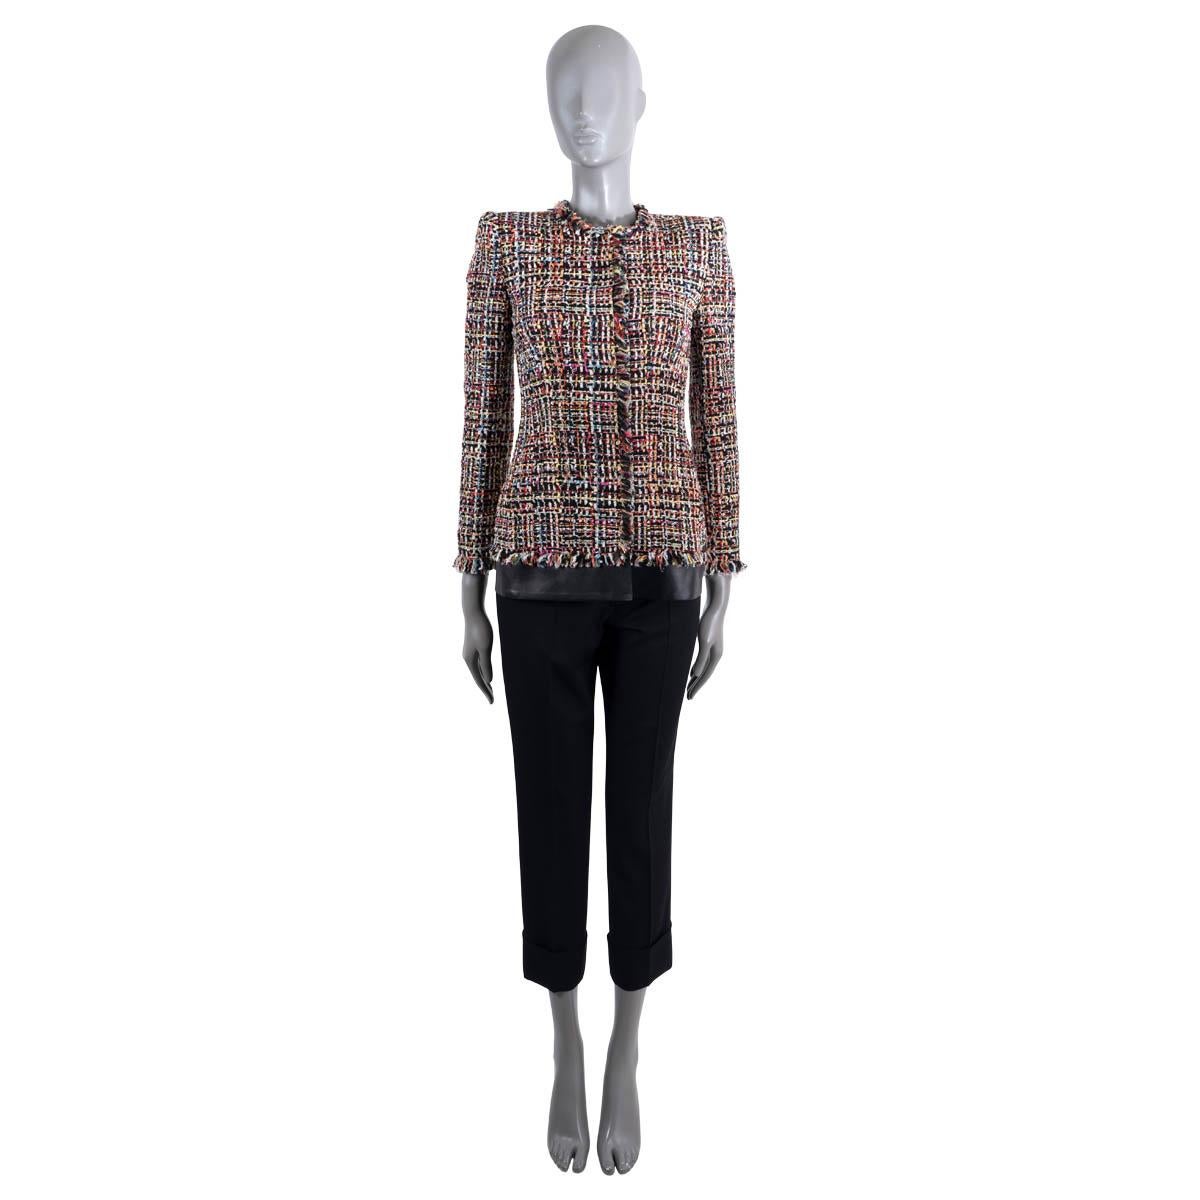 100% authentic Alexander McQueen tweed jacket in multicolor cotton (40%), polyamide (29%), viscose (25%), wool (4%), acrylic (1%) and polyester (1%). Features a slim, collarless silhouette, frayed edges and a black leather hem. Closes with concealed